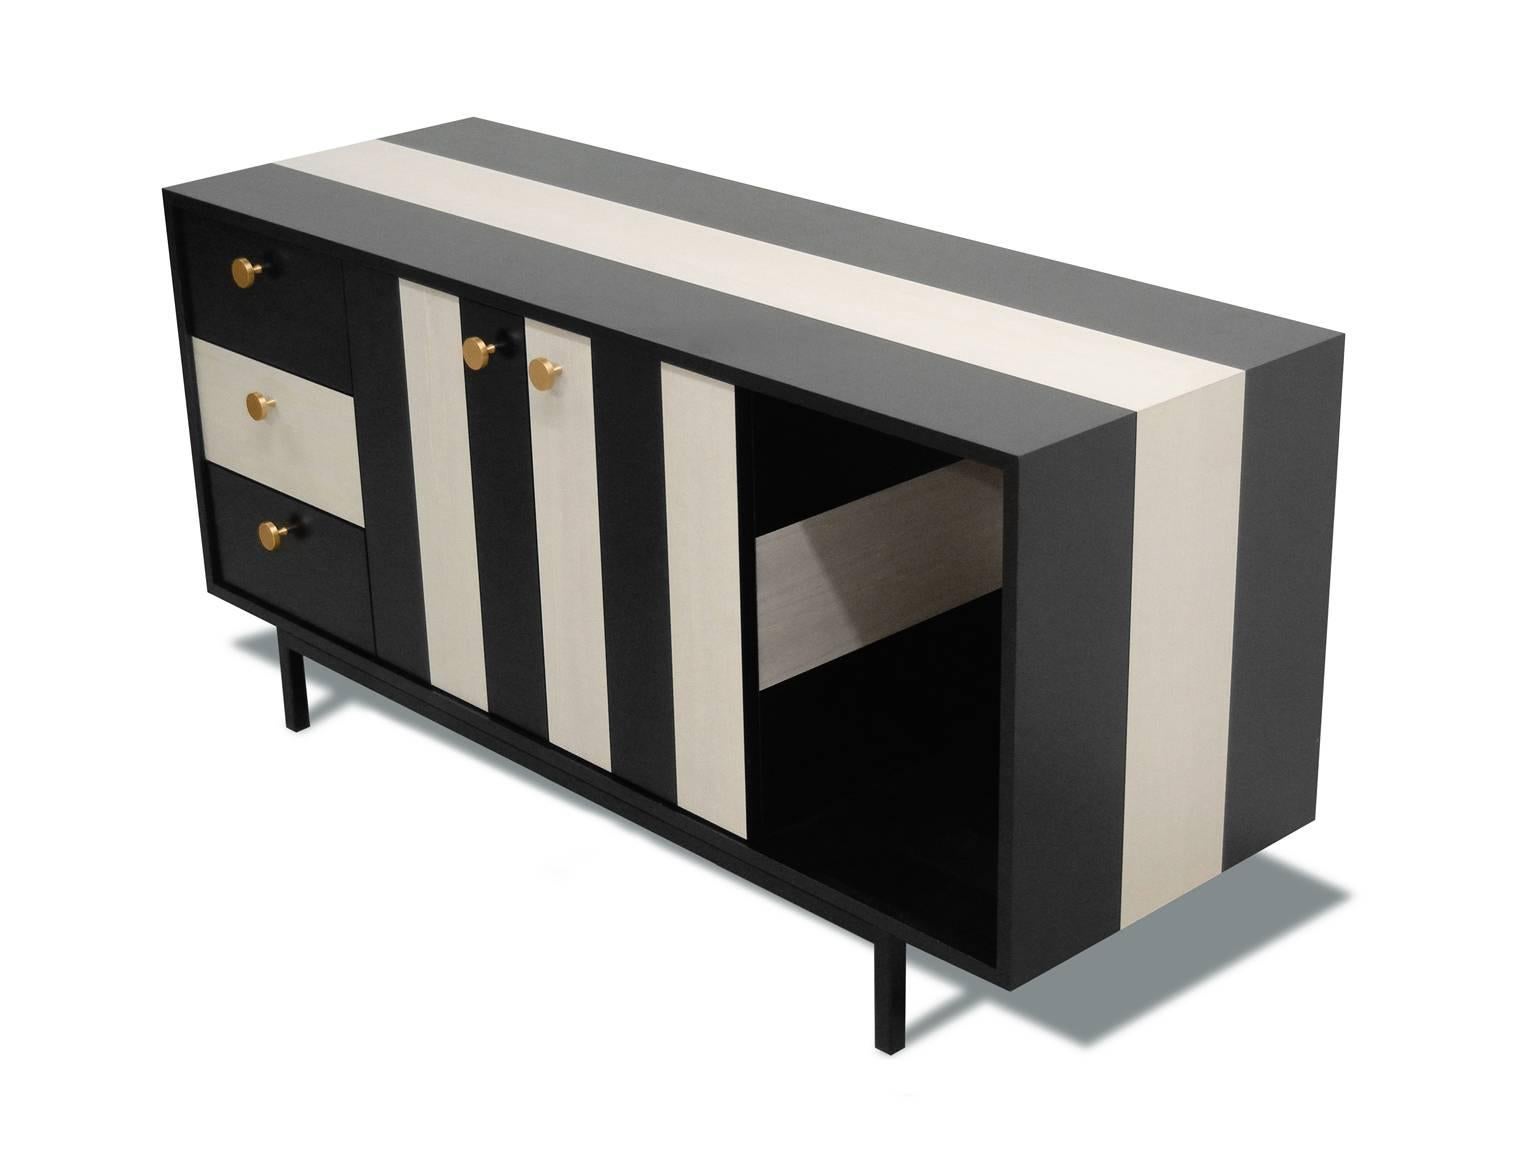 The No Wave credenza from Atocha Design is a statement-making piece with a bold, monochromatic pattern. The second launch in the No Wave Series, this credenza is an extension of the Kick Back cocktail table aesthetic, for elegant yet ample general